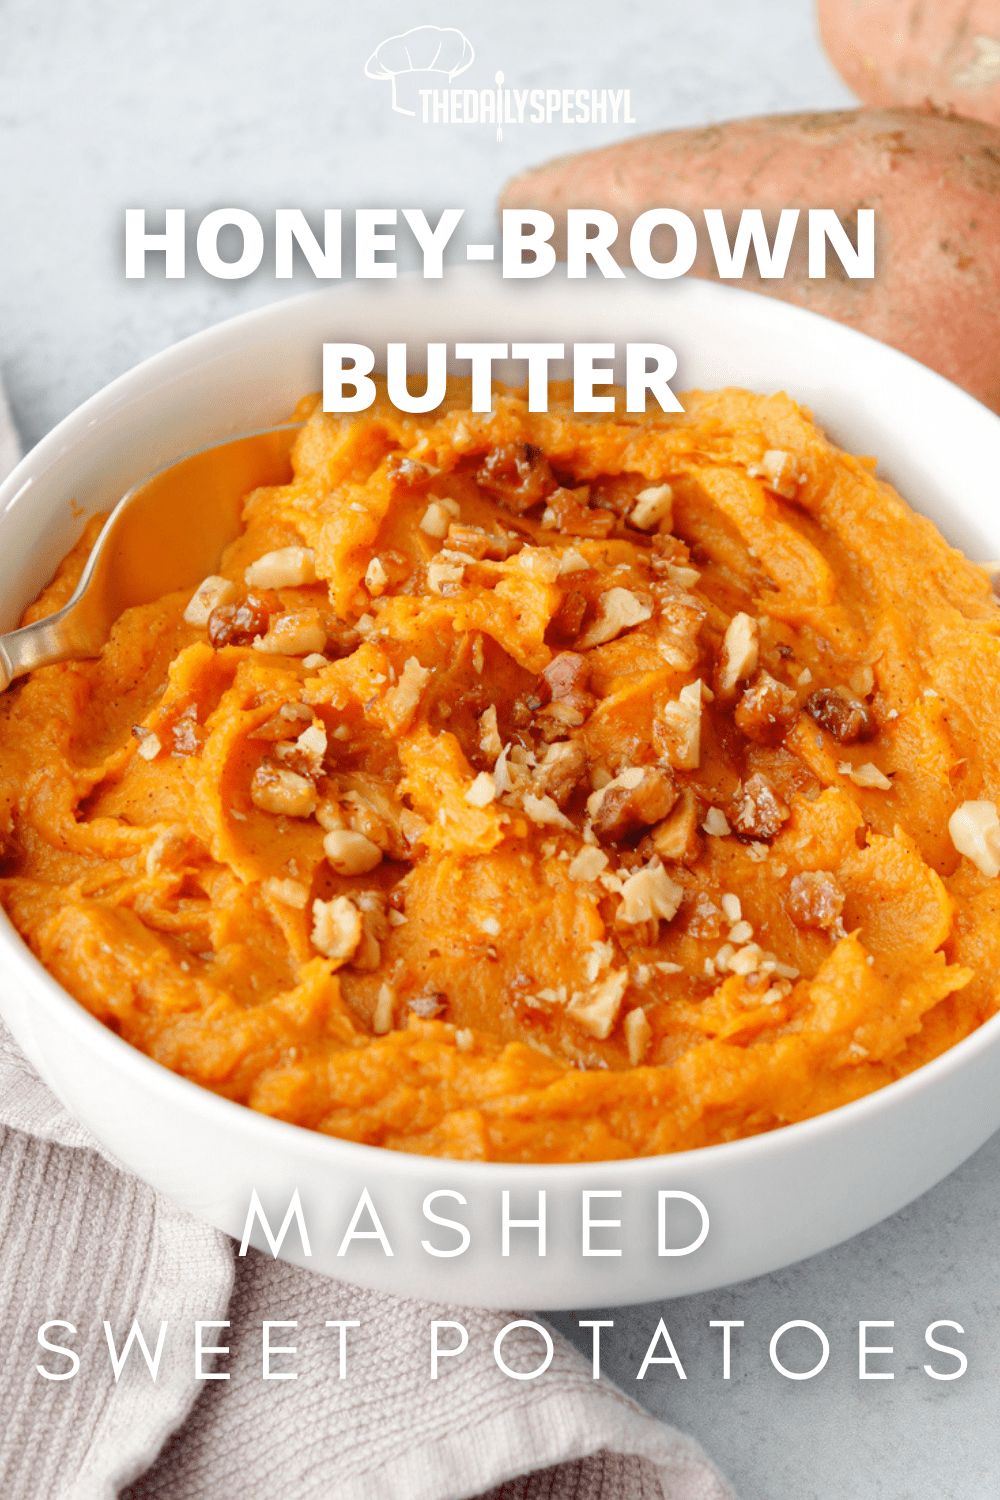 Honey-Brown Butter Mashed Sweet Potatoes - The Daily Speshyl